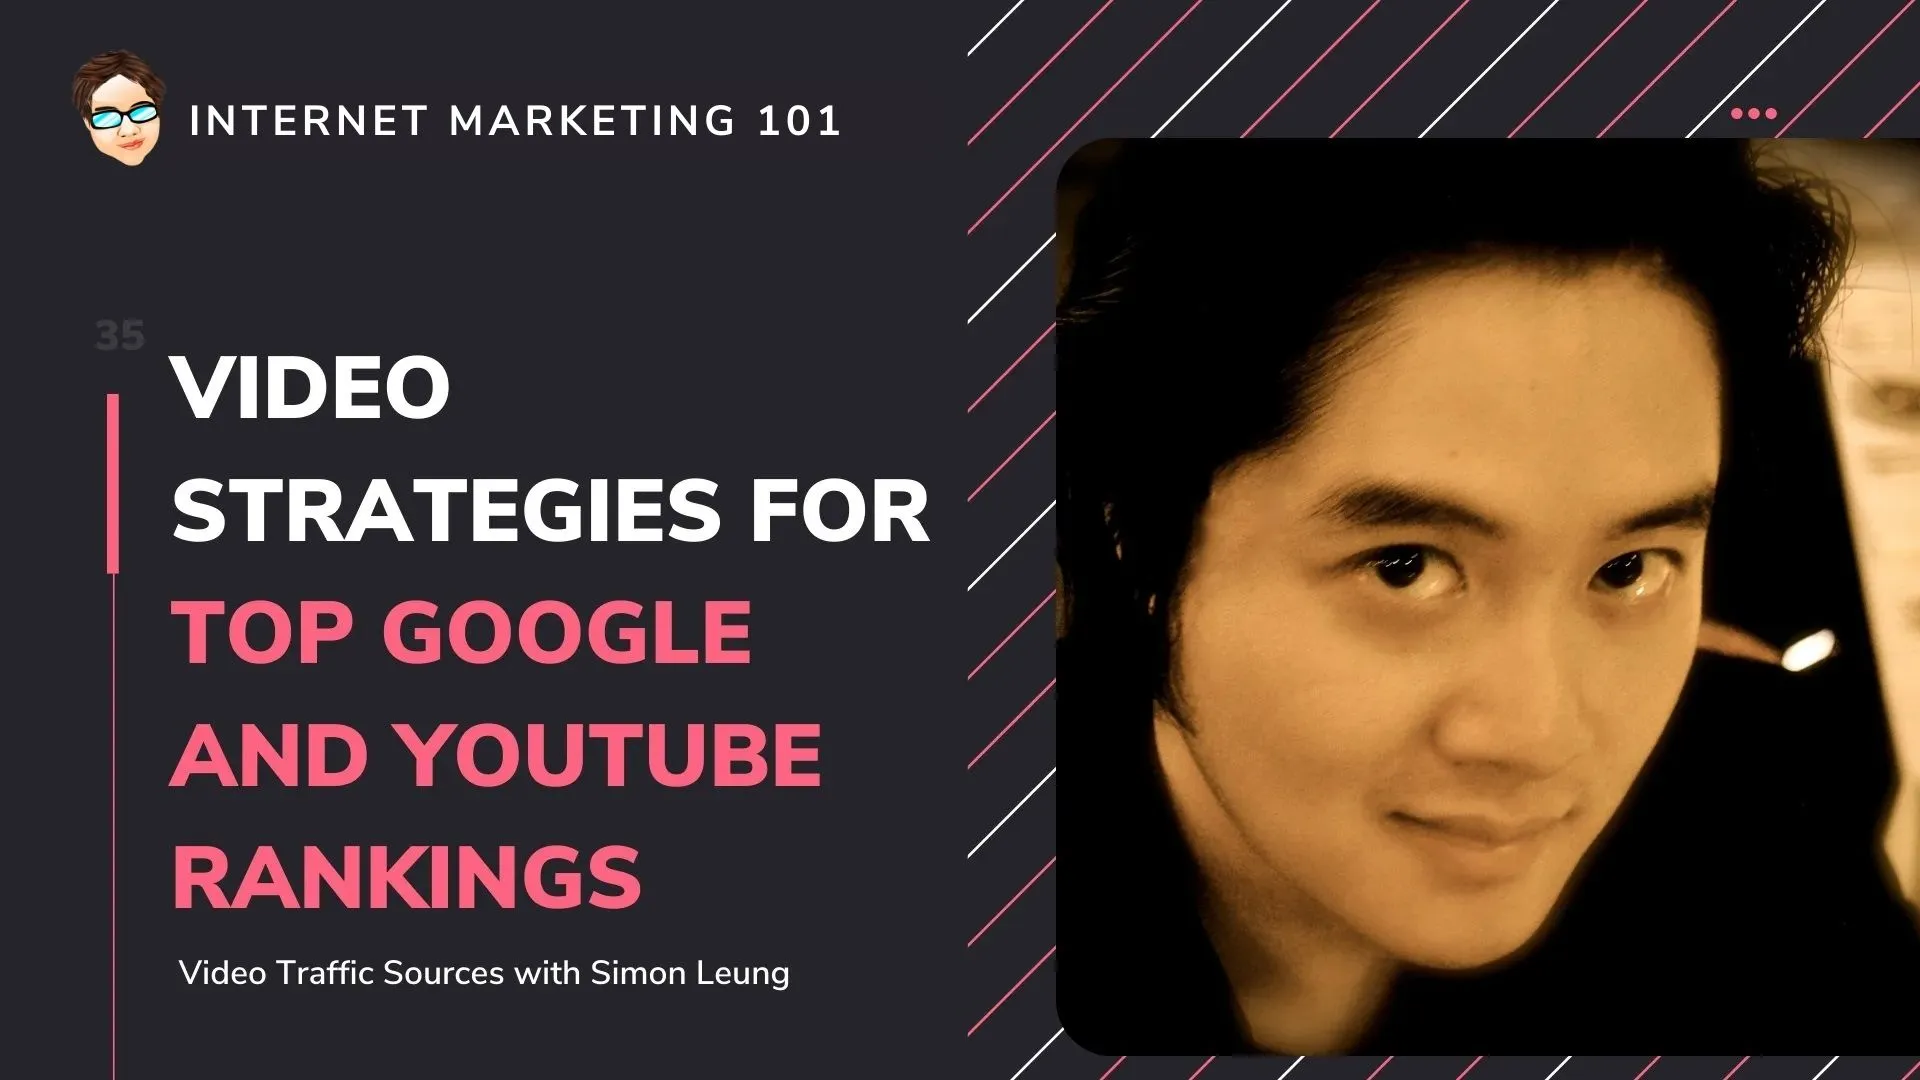 Internet Marketing 101 - Video Strategies For Top Google And YouTube Rankings (Simon Leung)